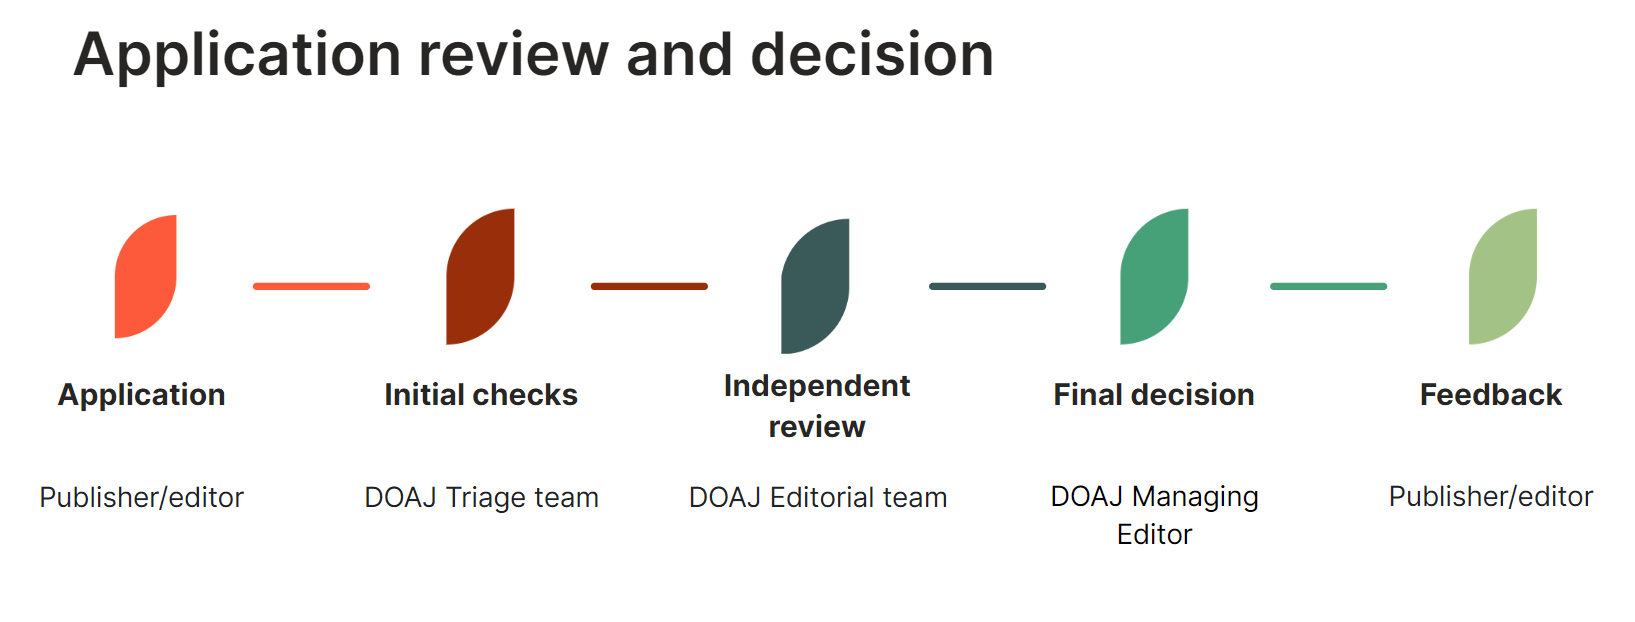 An image showing our application review and decision process: 1) Publisher or Editor submits an application. 2) The application is triaged to check it is complete and proper. 3) The DOAJ Editorial Team does independent review. 4) A managing editor makes the final decision 5) Decision is communicated with feedback to the publisher or editor